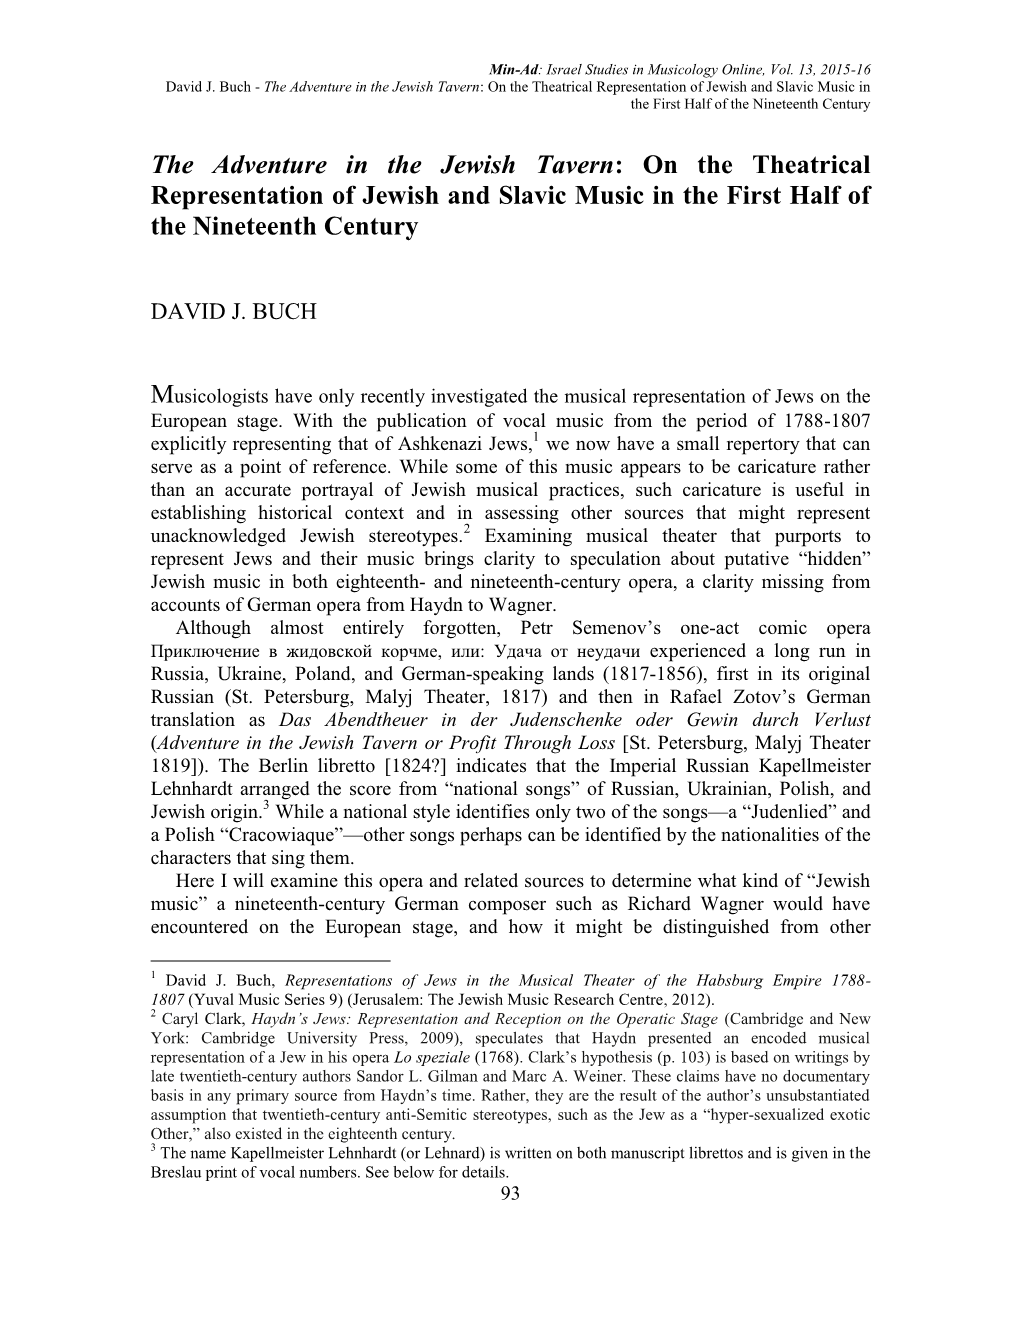 The Adventure in the Jewish Tavern: on the Theatrical Representation of Jewish and Slavic Music in the First Half of the Nineteenth Century